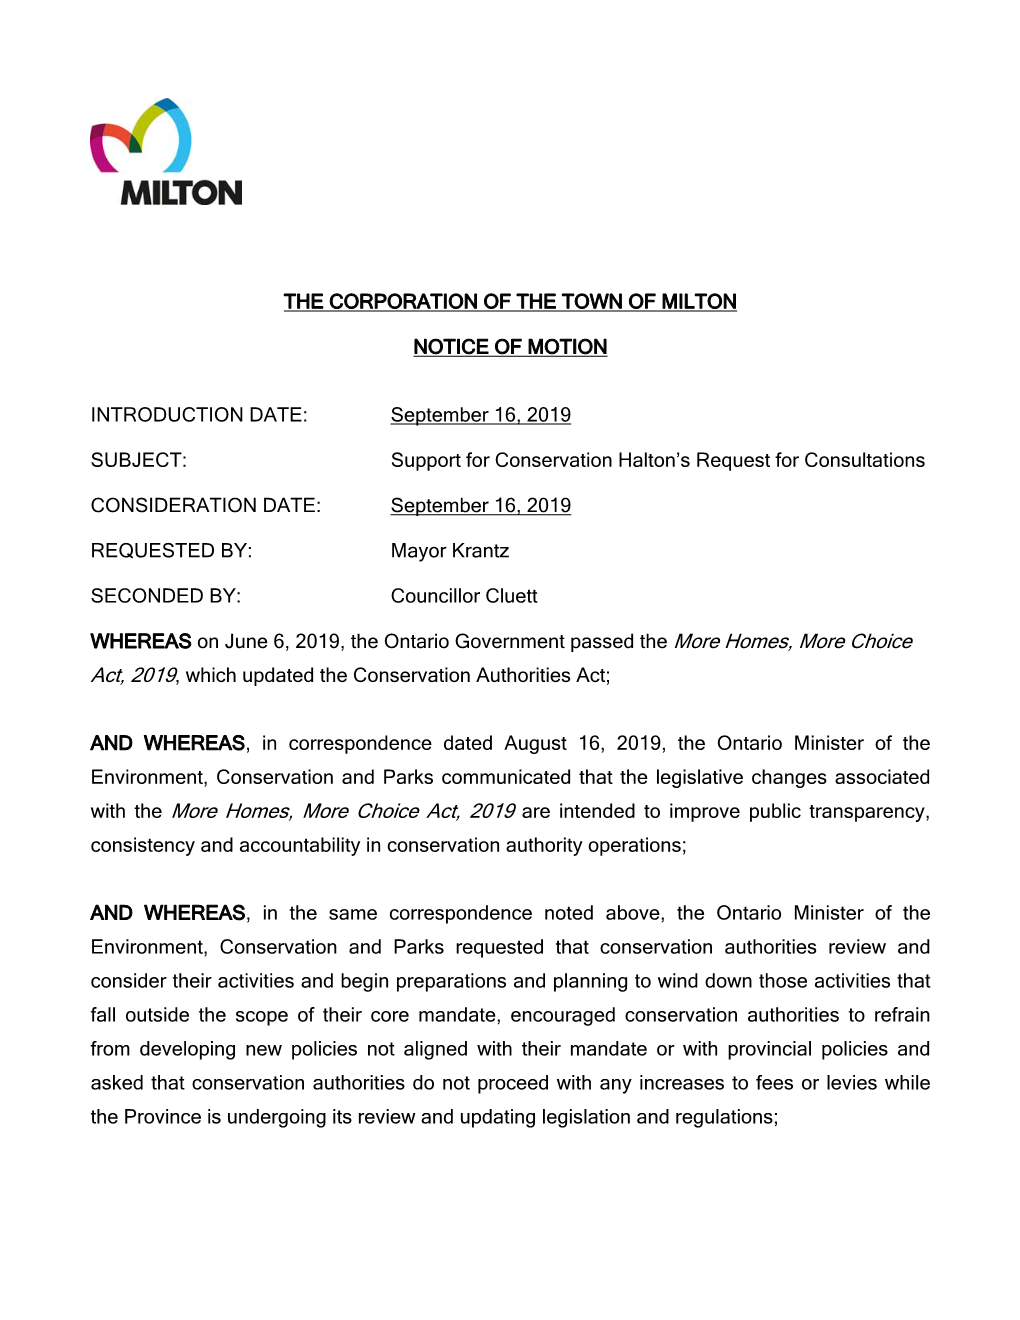 The Corporation of the Town of Milton Notice of Motion